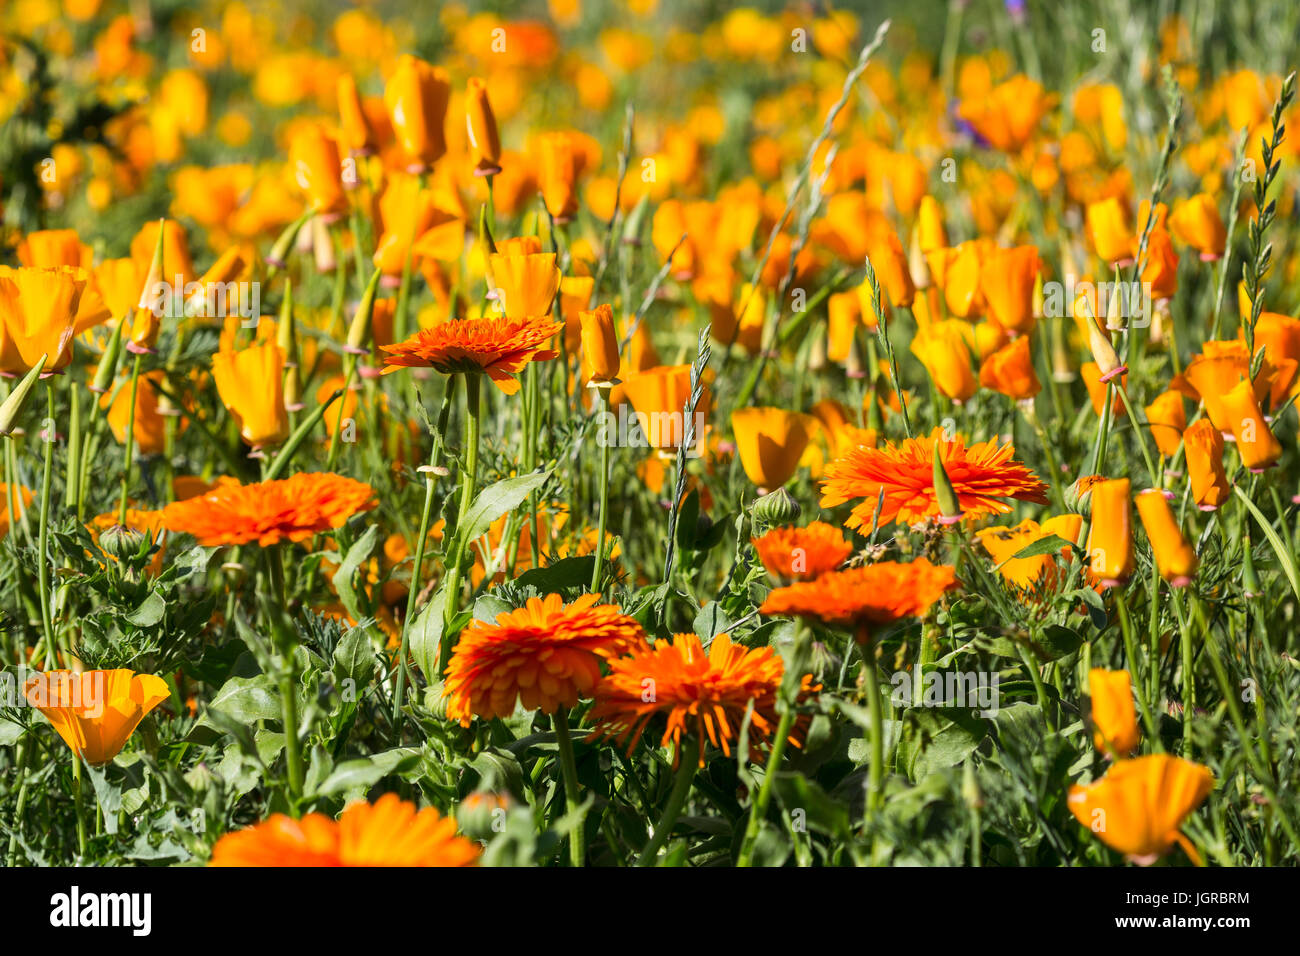 Marigolds ,flowers growing and blooming  on 'Jesus Green' cambridge. Stock Photo